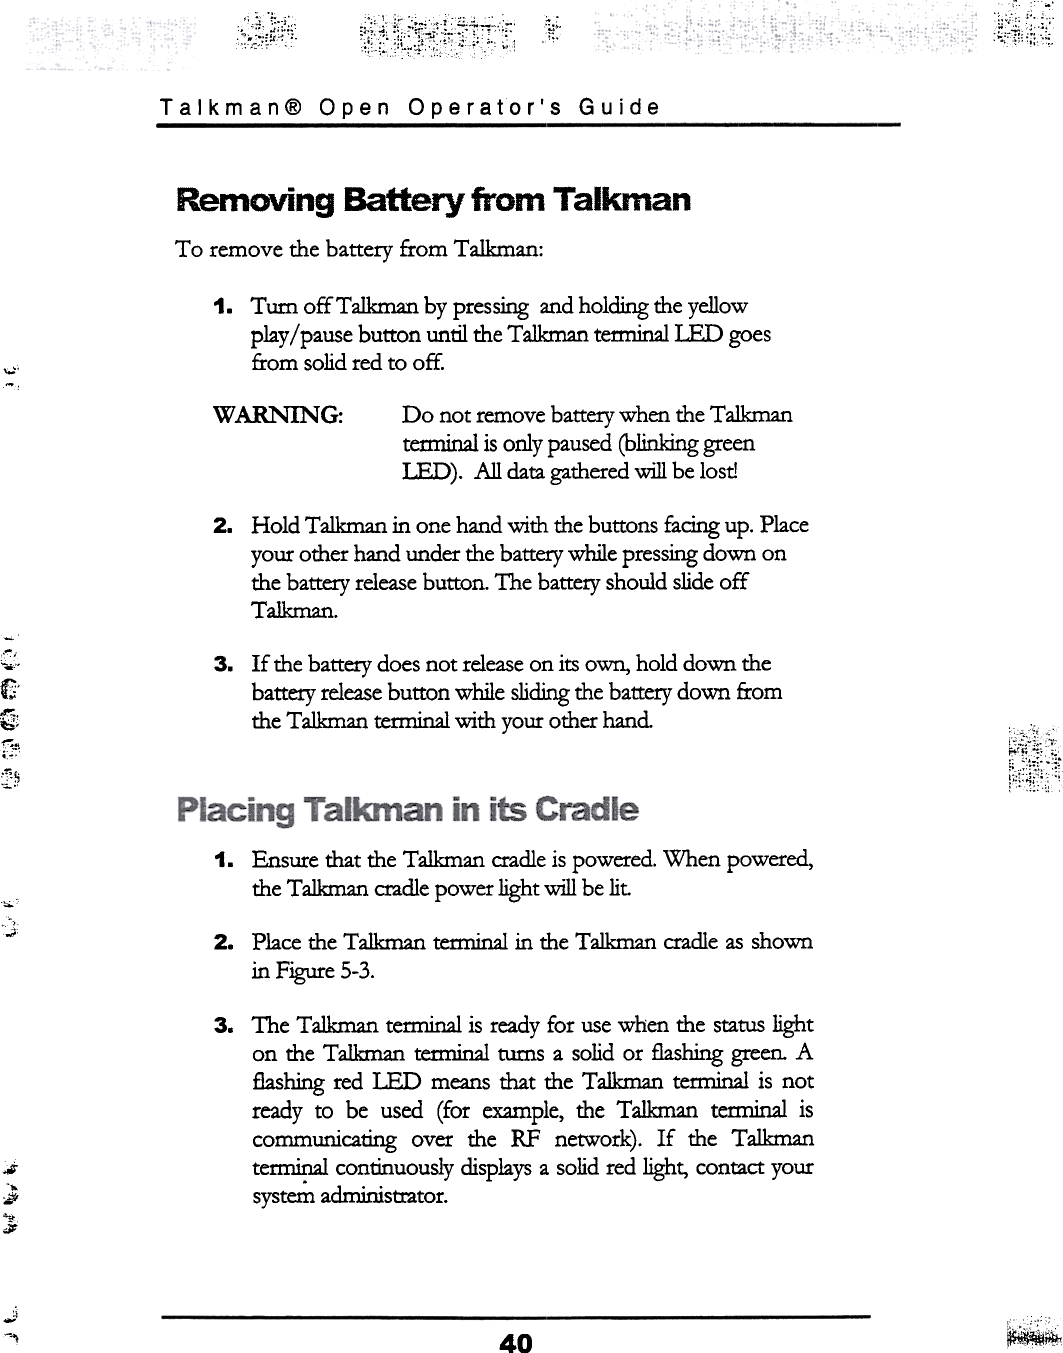 ~;~~,;~:~-.~;~1:;i~i.;i. :1!:.~Talkman@  Open  Operator&apos;s  GuideRemoving  Battery  from  TalkmanTo  remove  the  battery  from  Talkman:1.  Turn  offTalkman  by pressing and holding d1e yellowplay / pause button  until d1e T a1kman tetminalIED  goesfrom  solid red to off.,0;&apos;-w ARNIN G: Do  not remove battery when the Ta1kmantenninal is only paused (blinking greenLED).  All  data gathered will  be lost!2.  Hold  Talkman in one hand with the buttons facing up. Placeyour other hand under the battery while pressing down onthe battery release button. The battery should slide offT alkman.c~,&quot;0.&quot;f&apos;~,t:i&apos;;-C&quot;&quot;&quot;:f~3.  If  the battery does not release on its own, hold down thebattery release button  while sliding the battery down  fromthe Talkman terminal with your other hand~~~~1.  Ensure iliat  the Talkman  cradle is powered. When  powered,the Talkman cradle power light will  be lit.&quot;&apos;&quot;.;; 2.  Place  dle  Talkman  terminal  in  dle  TaJkman  cradle  as shownin  Figure  5-3.3.  The  Talkman  tem1inal is ready for  use when the status lighton  the Talkman  terminal  turns a solid or  flashing green. Aflashing red LED  means that  the T alkman tem1inal is  notready  to  be  used  (for  example, the  Talkman  terminal  iscommunicating  over  the  RF  network).  If  the  Talkmantem1inal continuously  displays a solid red light,  contact yoursyst~  administrator.~-..-;~..;.J-&quot;I ~~40